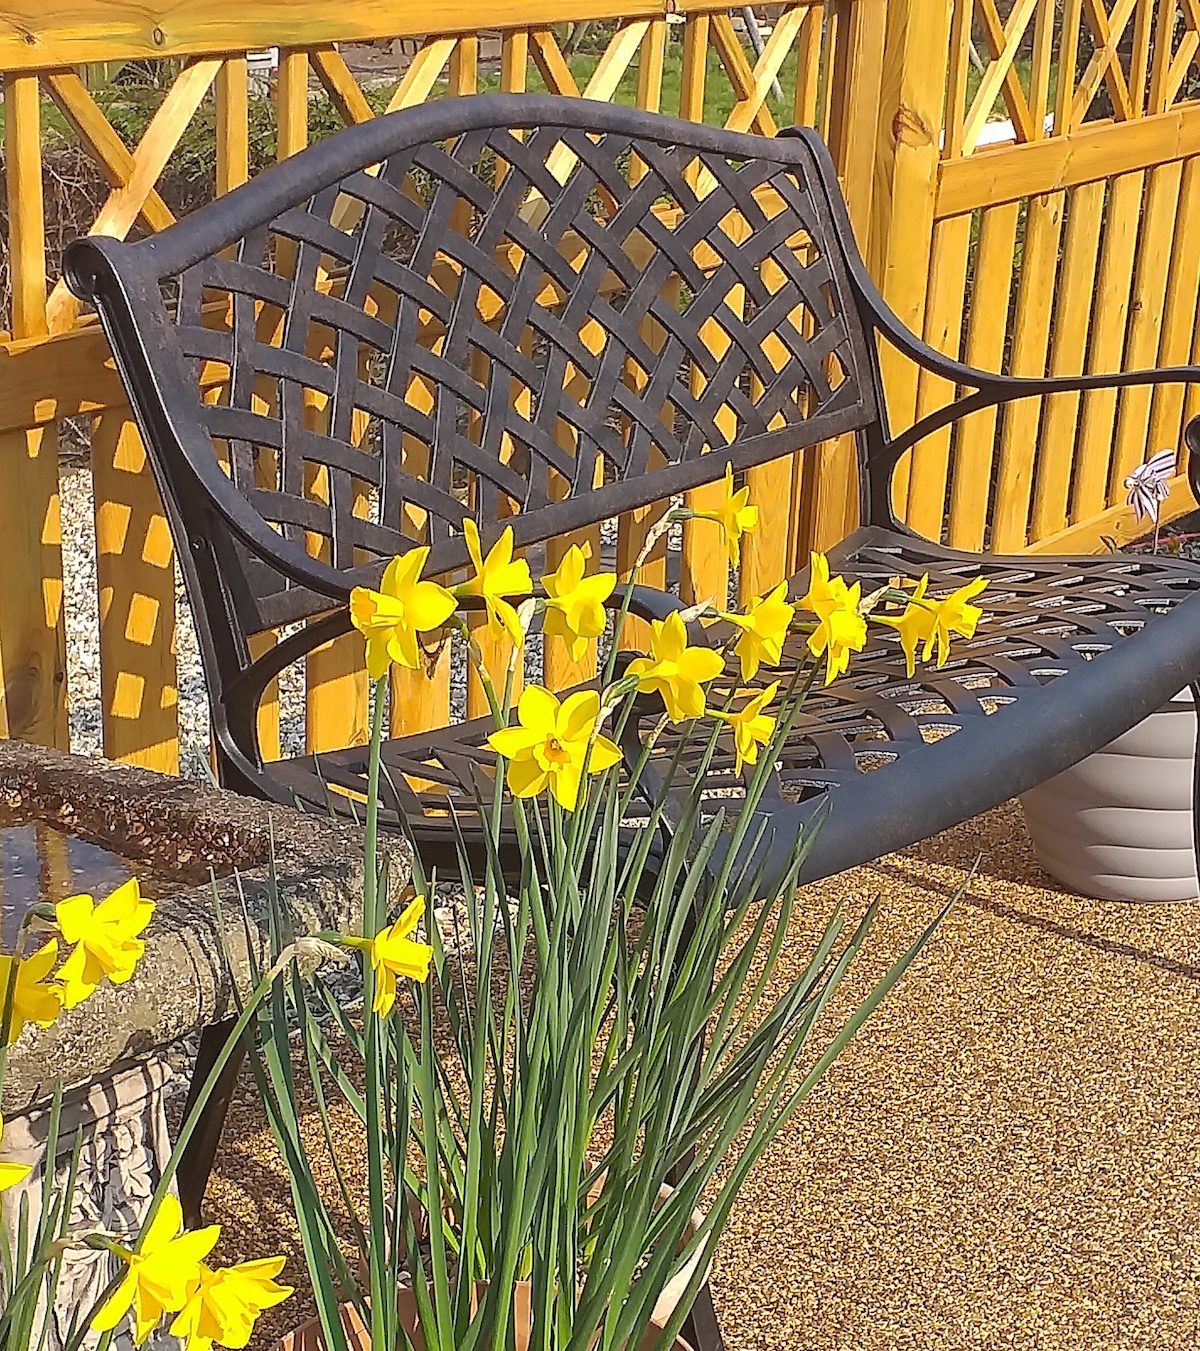 Is spring the best time to purchase new garden furniture?